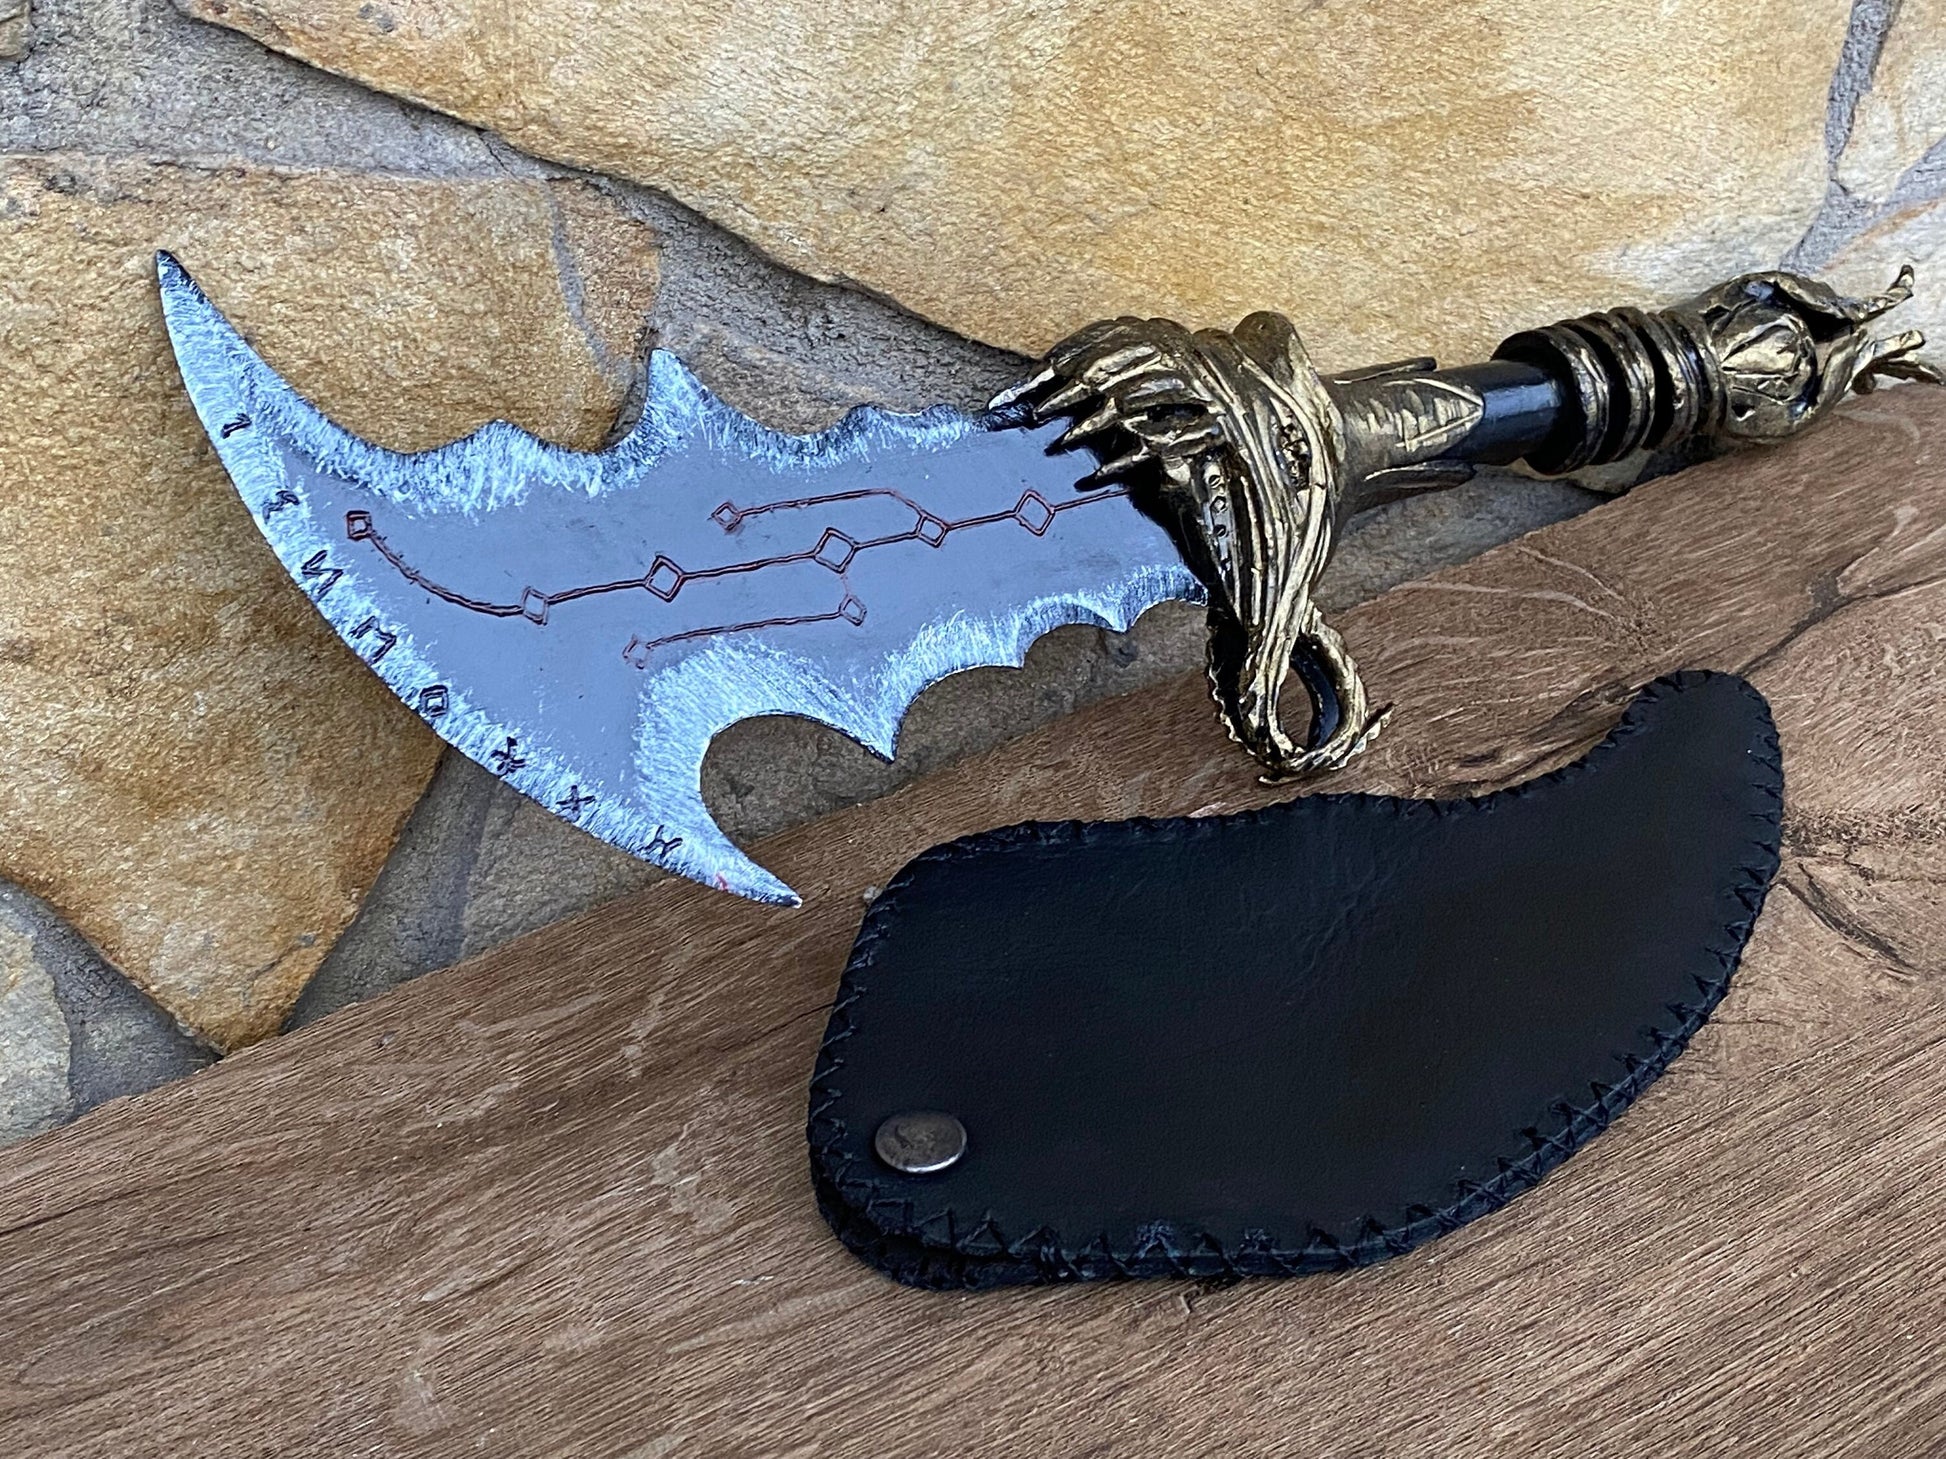 Blades of Chaos, Kratos, God of War, gamer gift, cosplay knife, Christmas, dads gift, viking axe, knife, axe, cosplay armor, cosplay weapon